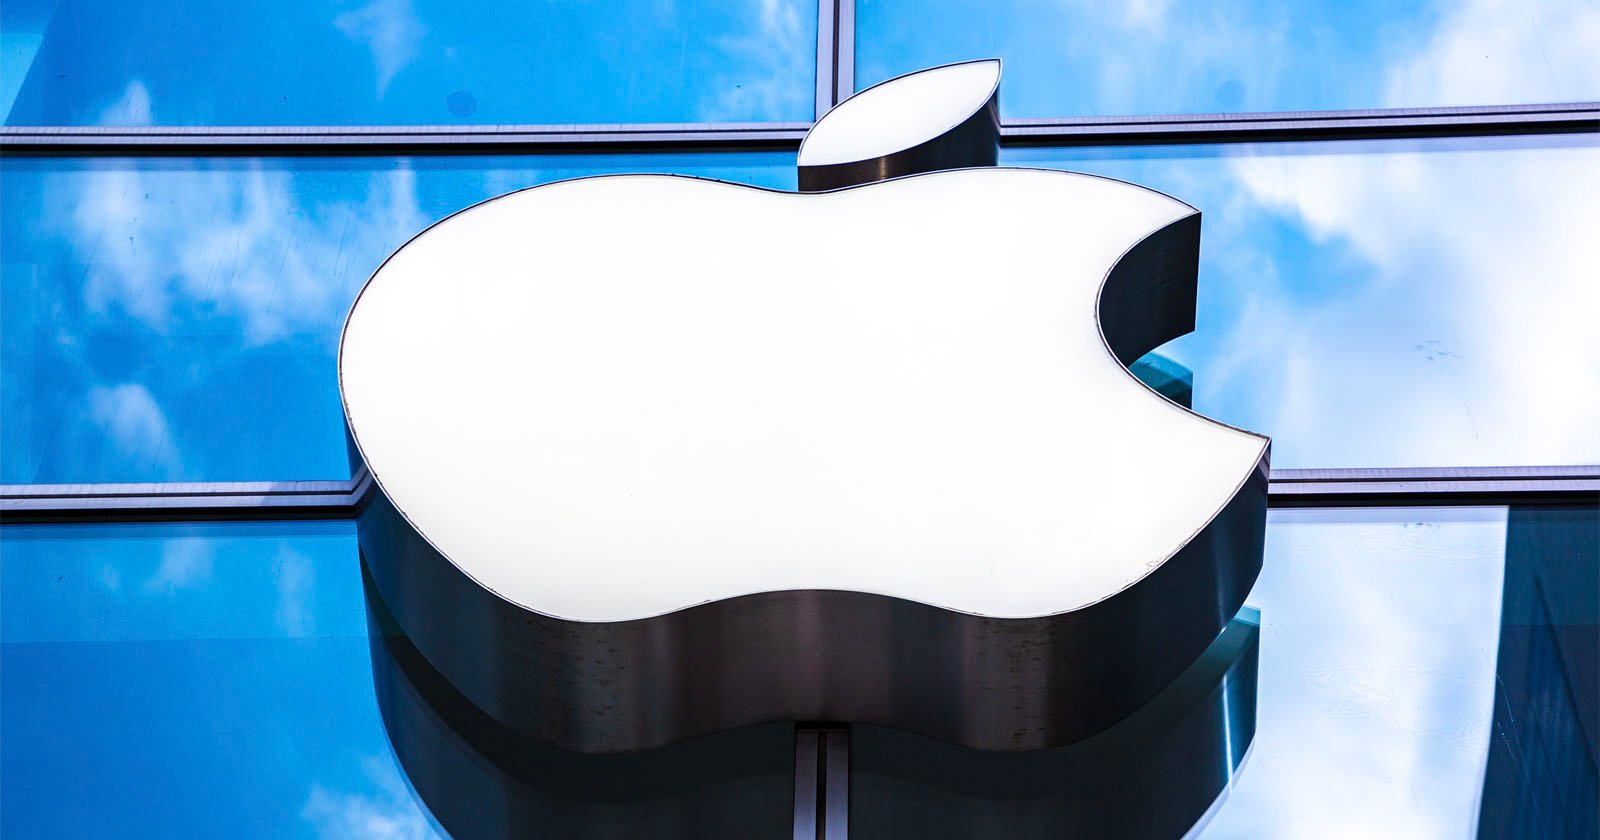 The Justice Departments Lawsuit Against Apple: Everything You Need to Know